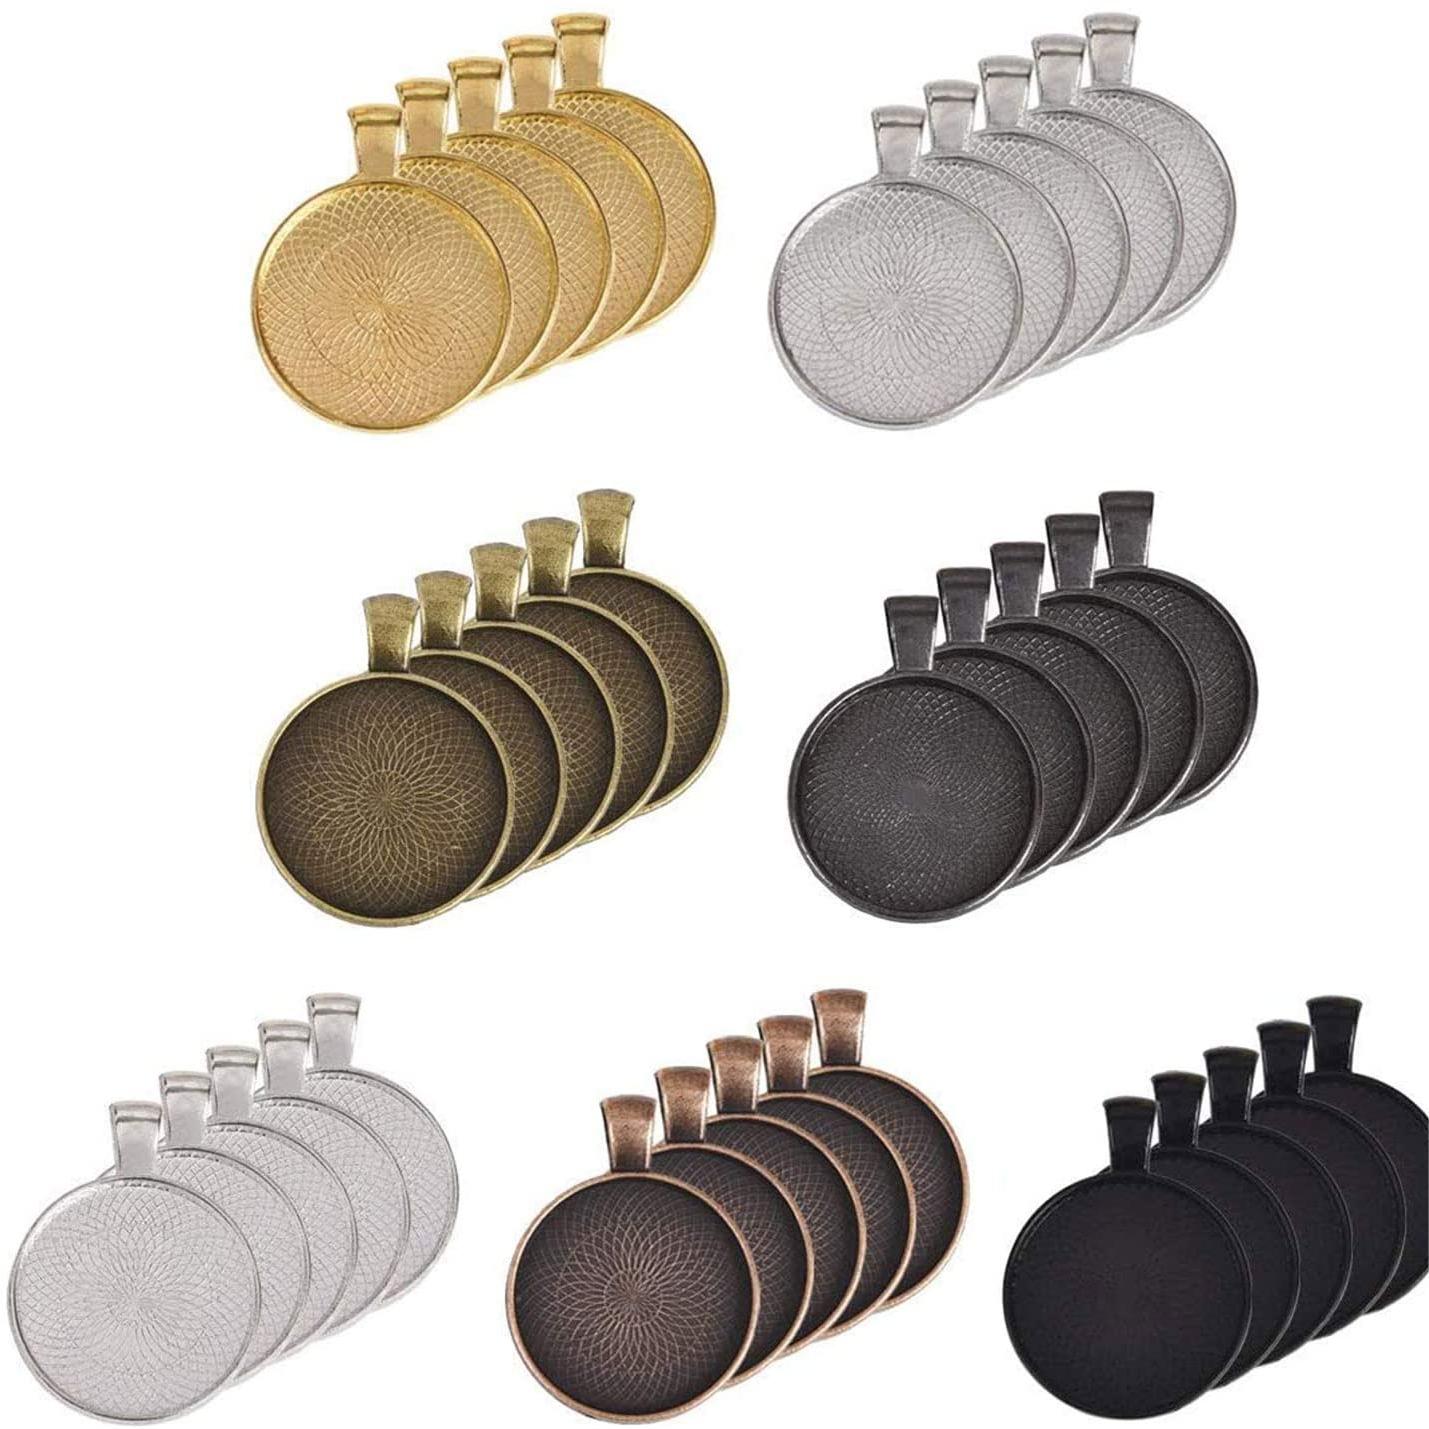 7 Colors Pendant Trays Round Bezel Blanks for Jewelry Making, Metal Alloy Cabochon Round Dome-25 mm/1 inch Diameter for Crafting DIY Photo Pendant